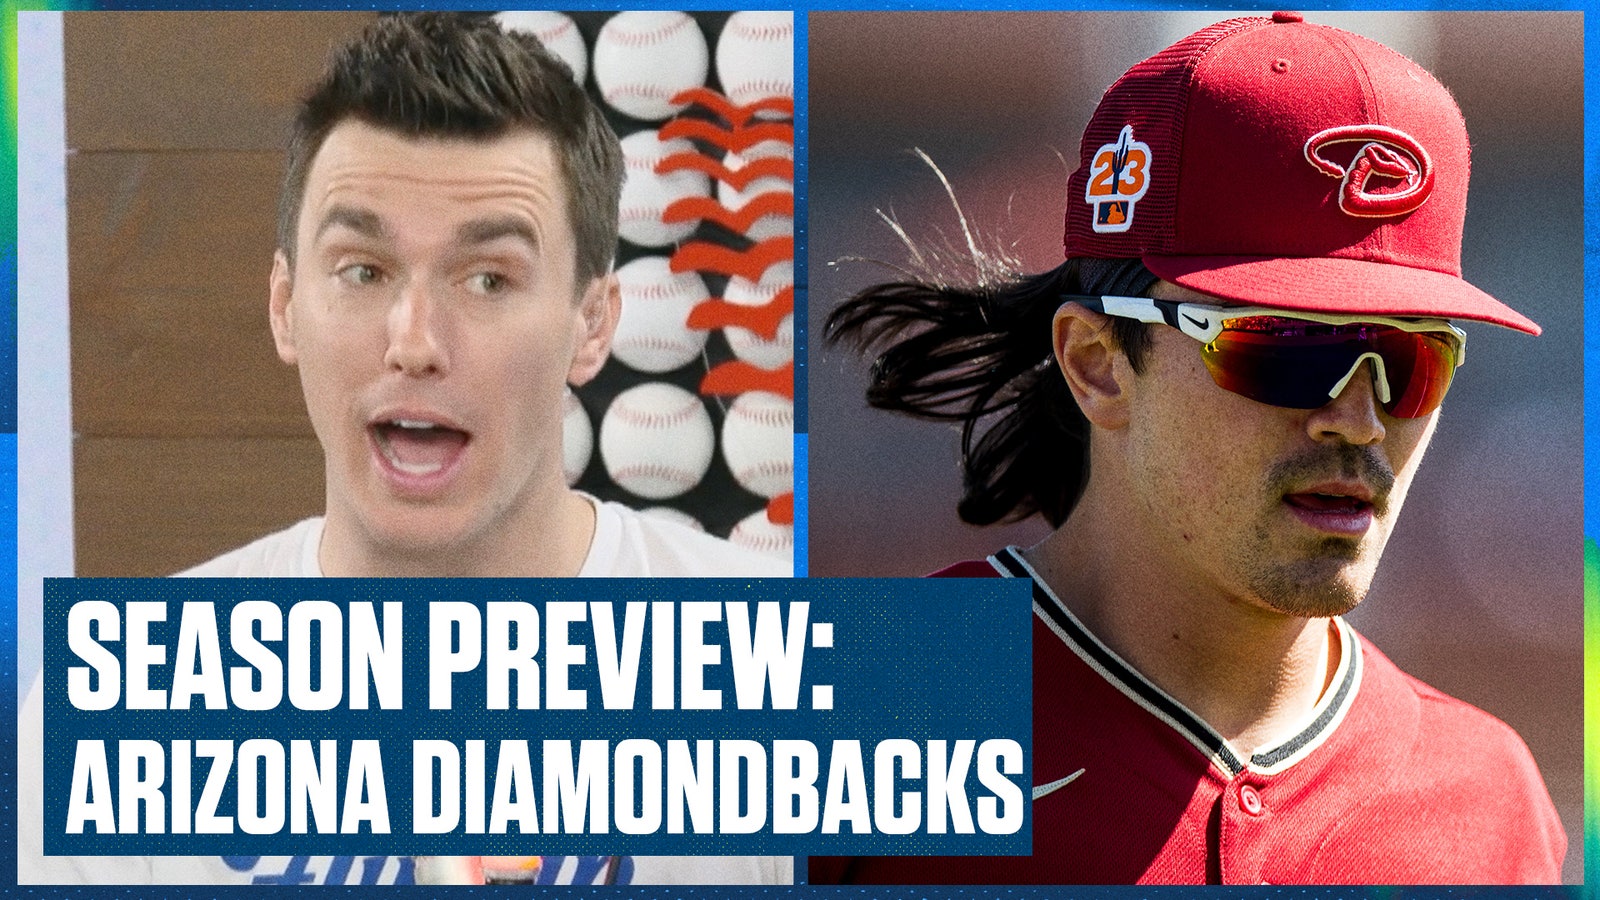 Diamondbacks season preview: Can they compete for a playoff spot?